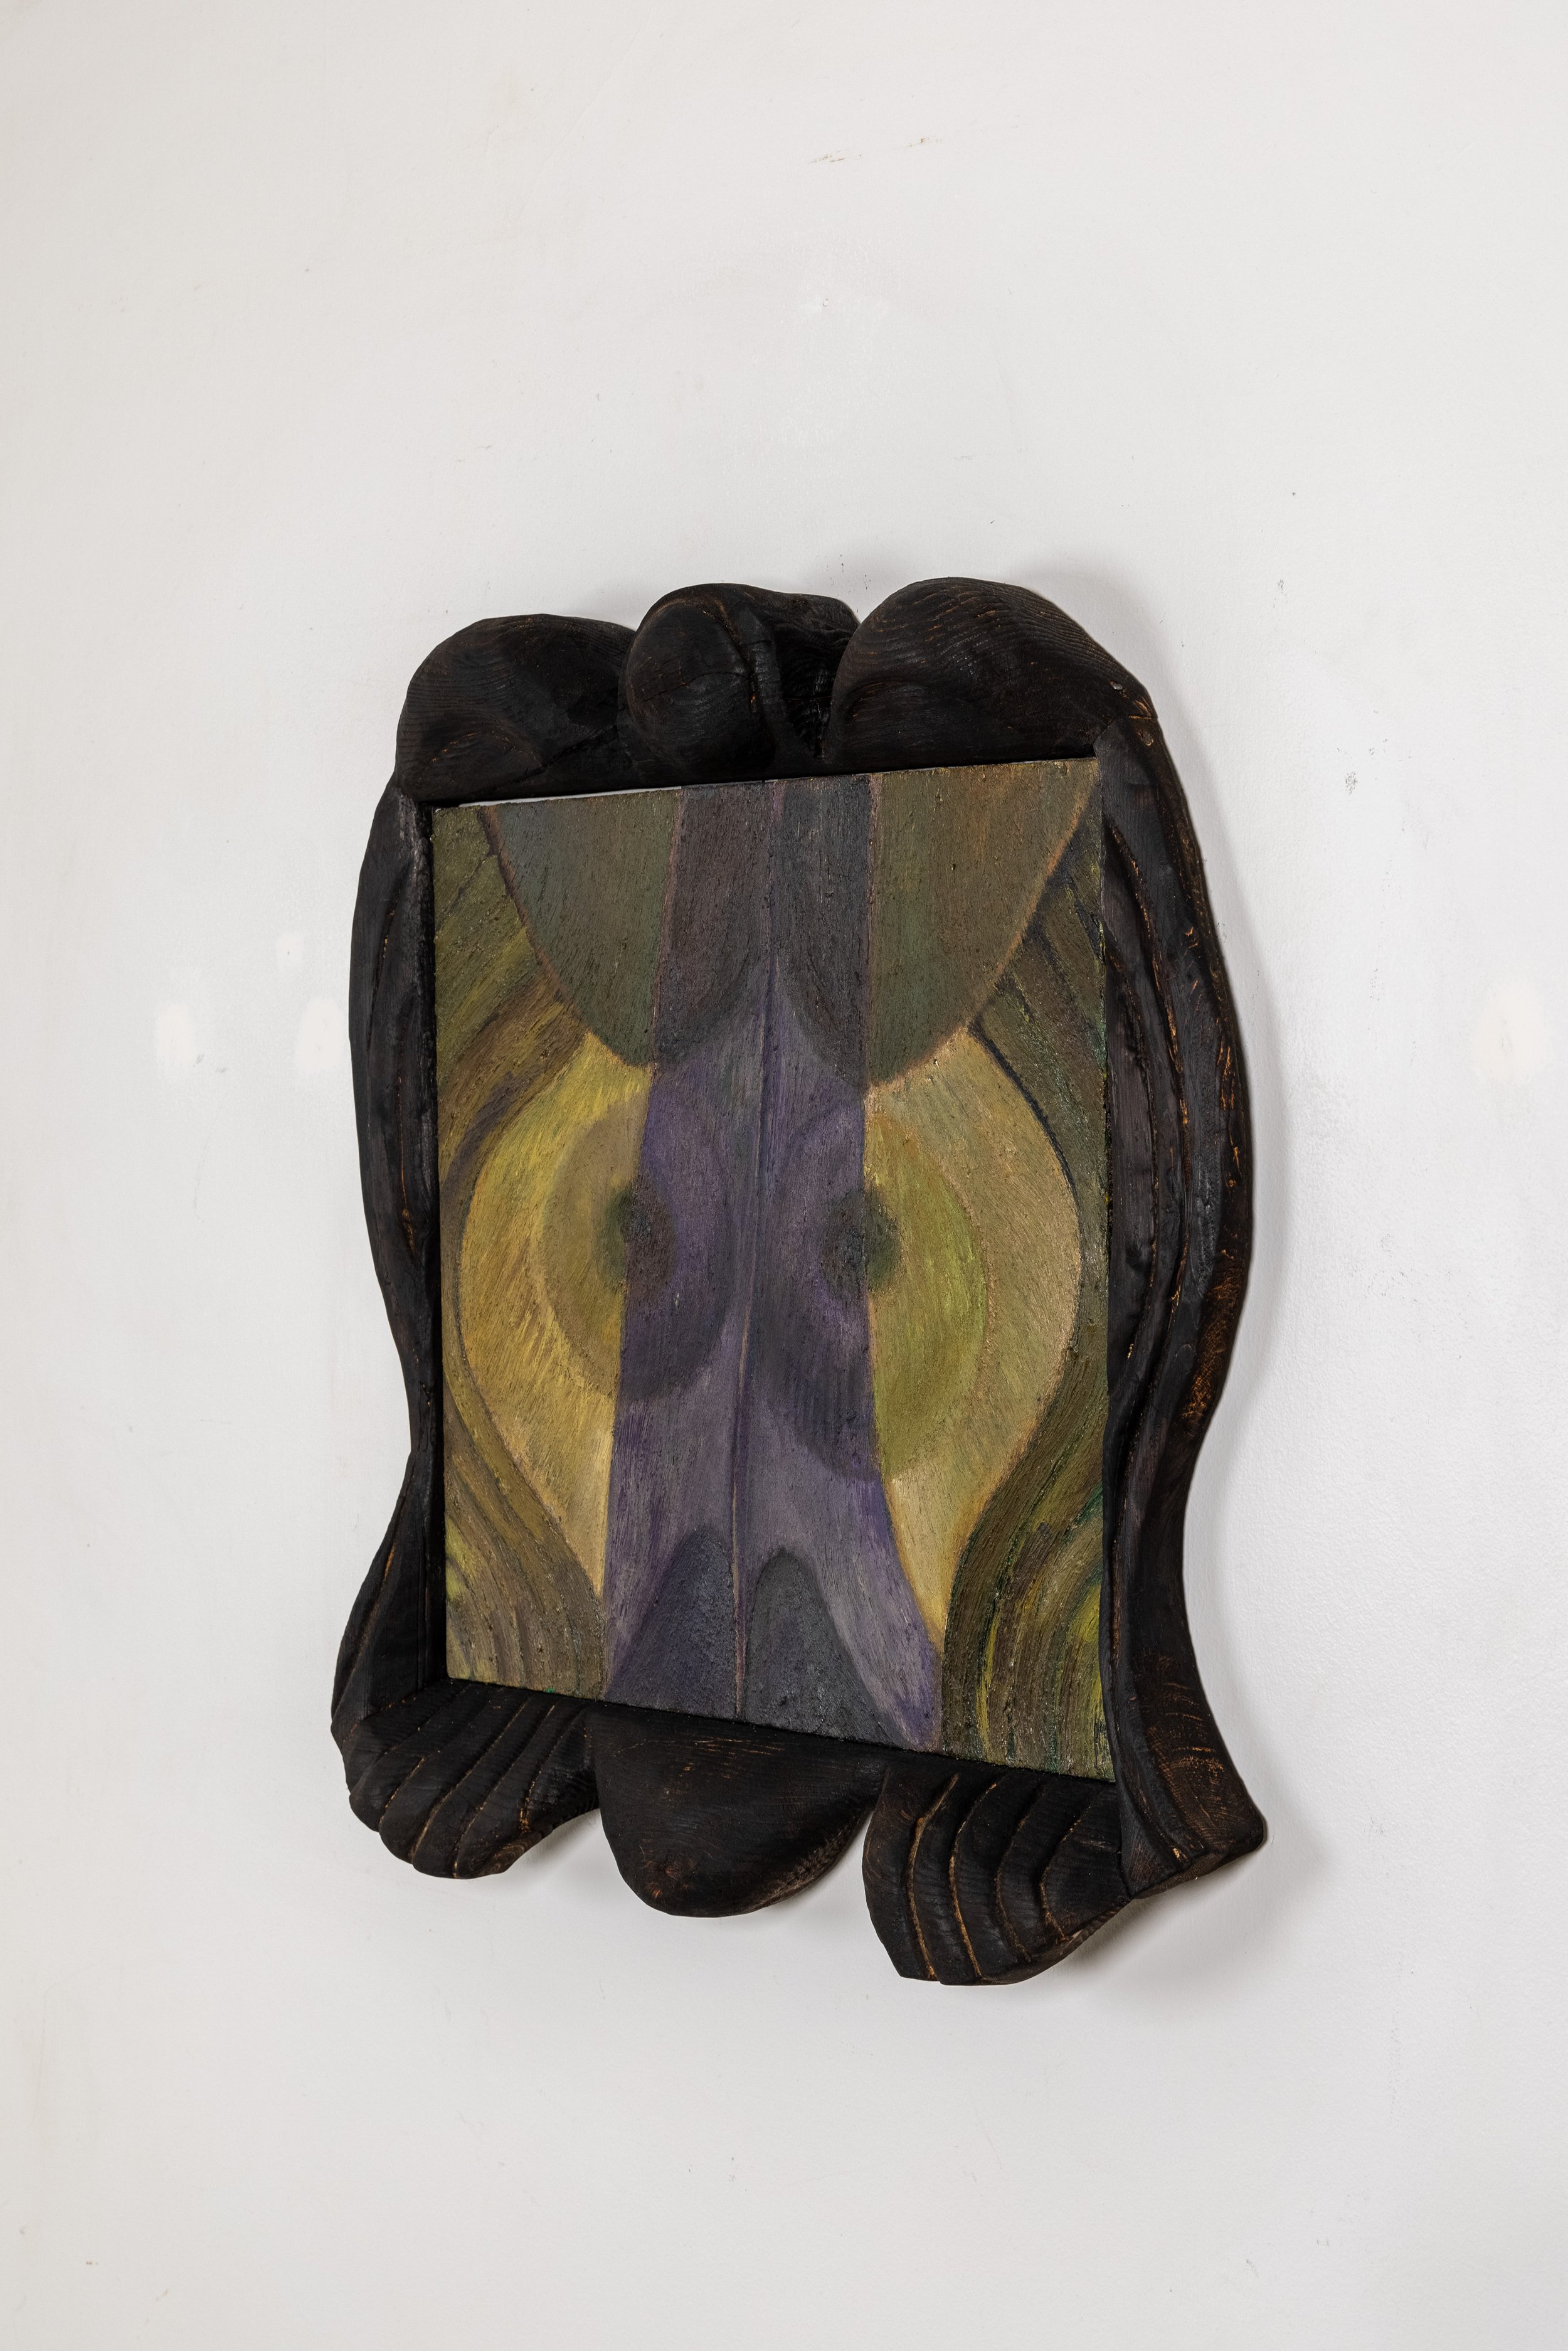 Siren, 2021, oil on canvas in charred custom wood frame, 29 x 27 x 4 inches